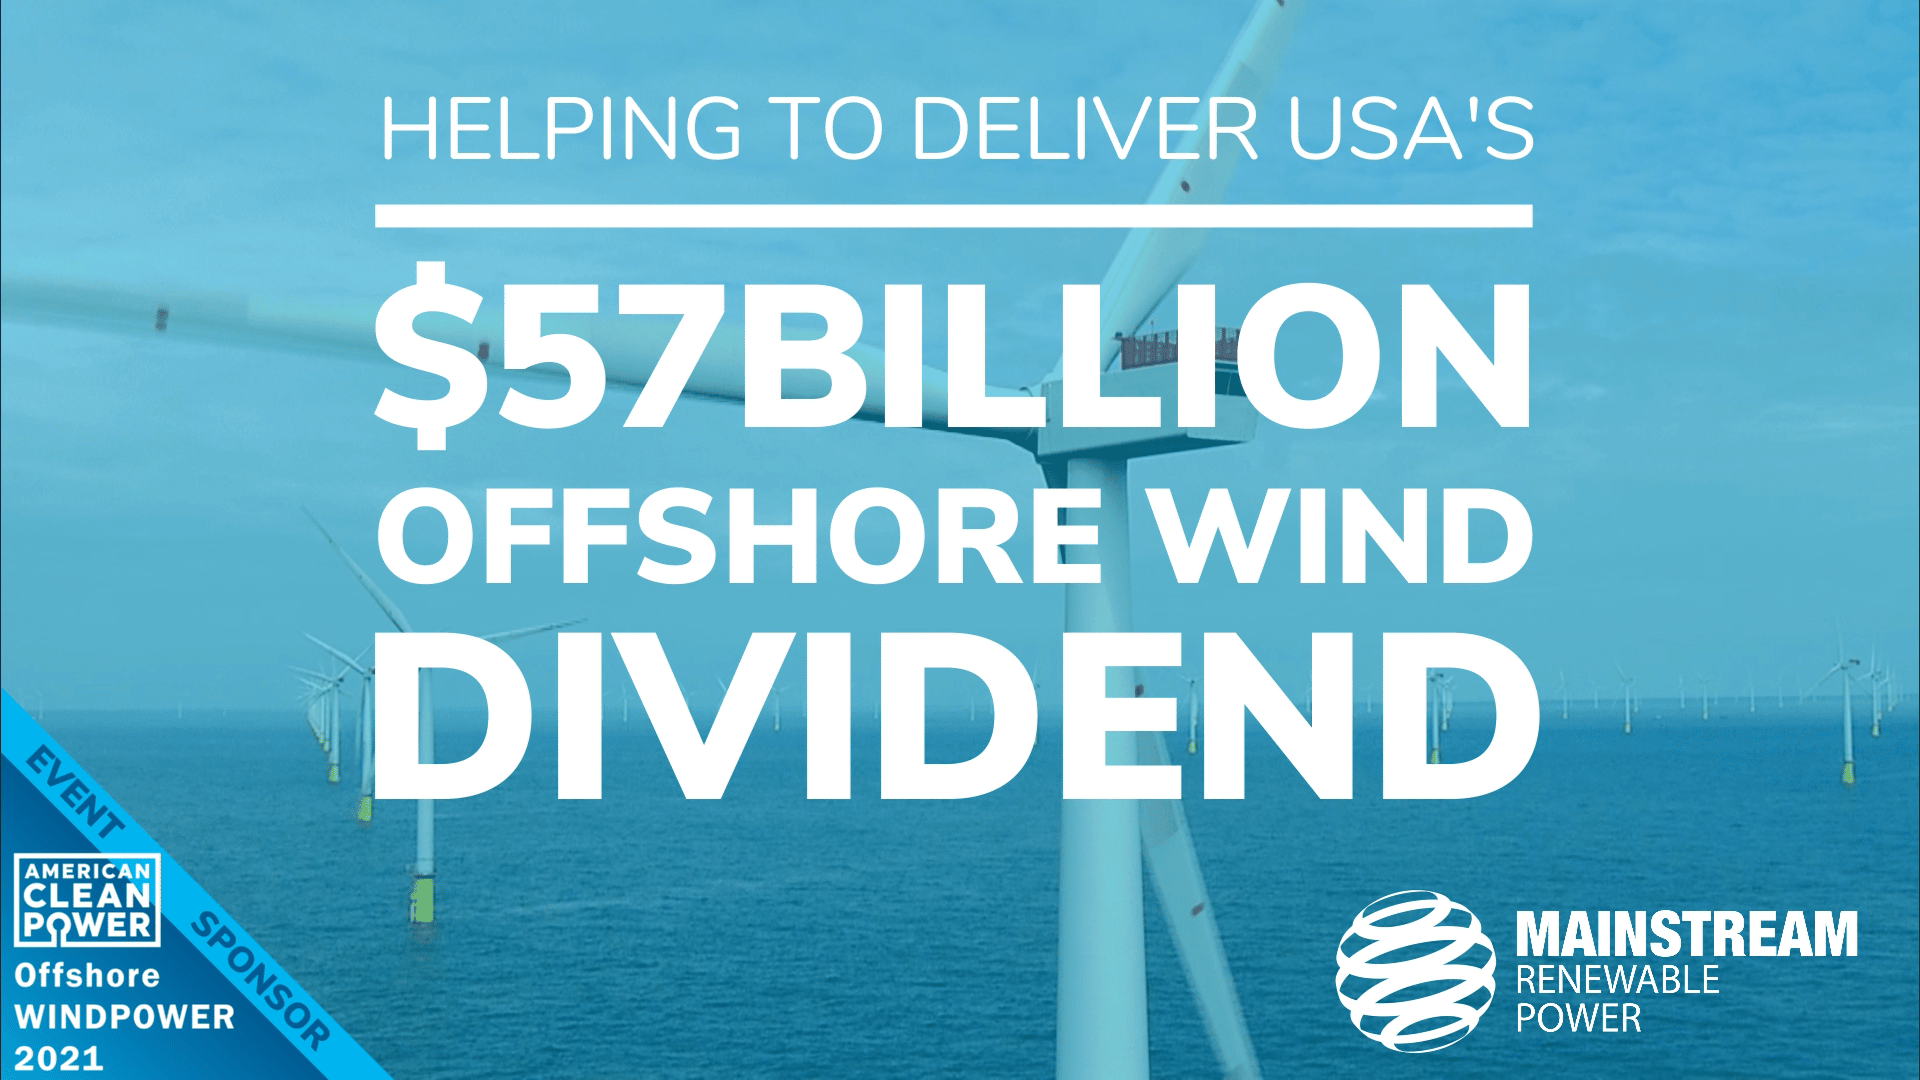 Helping to Deliver USA's $57Billion offshore wind dividend